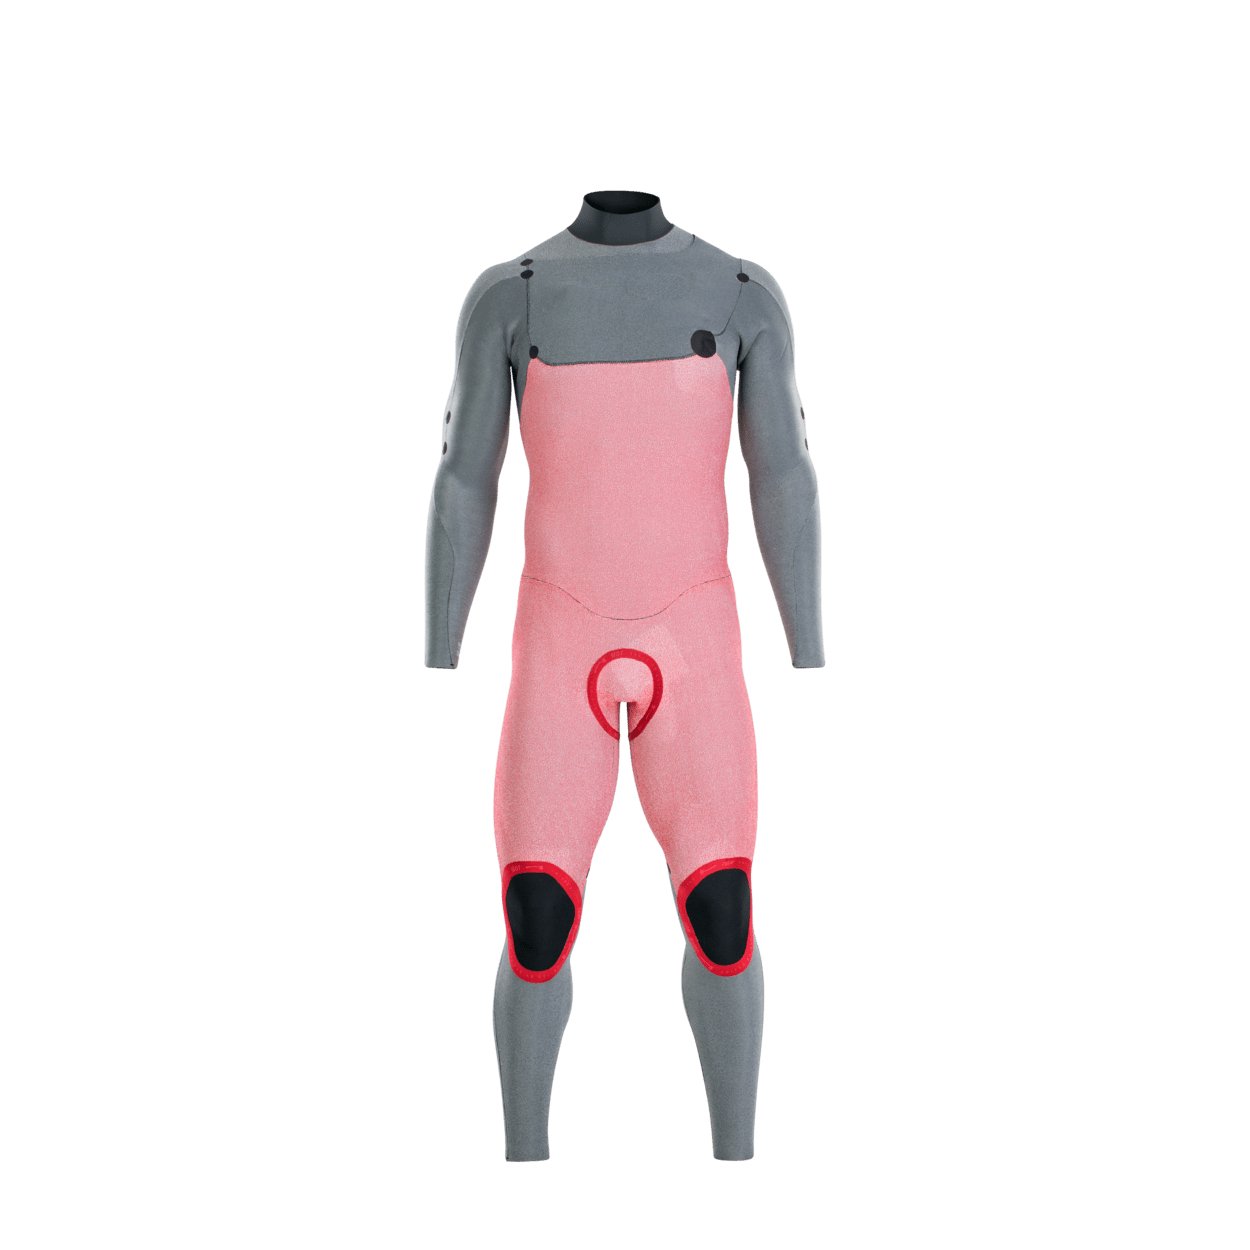 ION Seek Core 4/3 Front Zip 2022 - Worthing Watersports - 9010583056937 - Wetsuits - ION Water